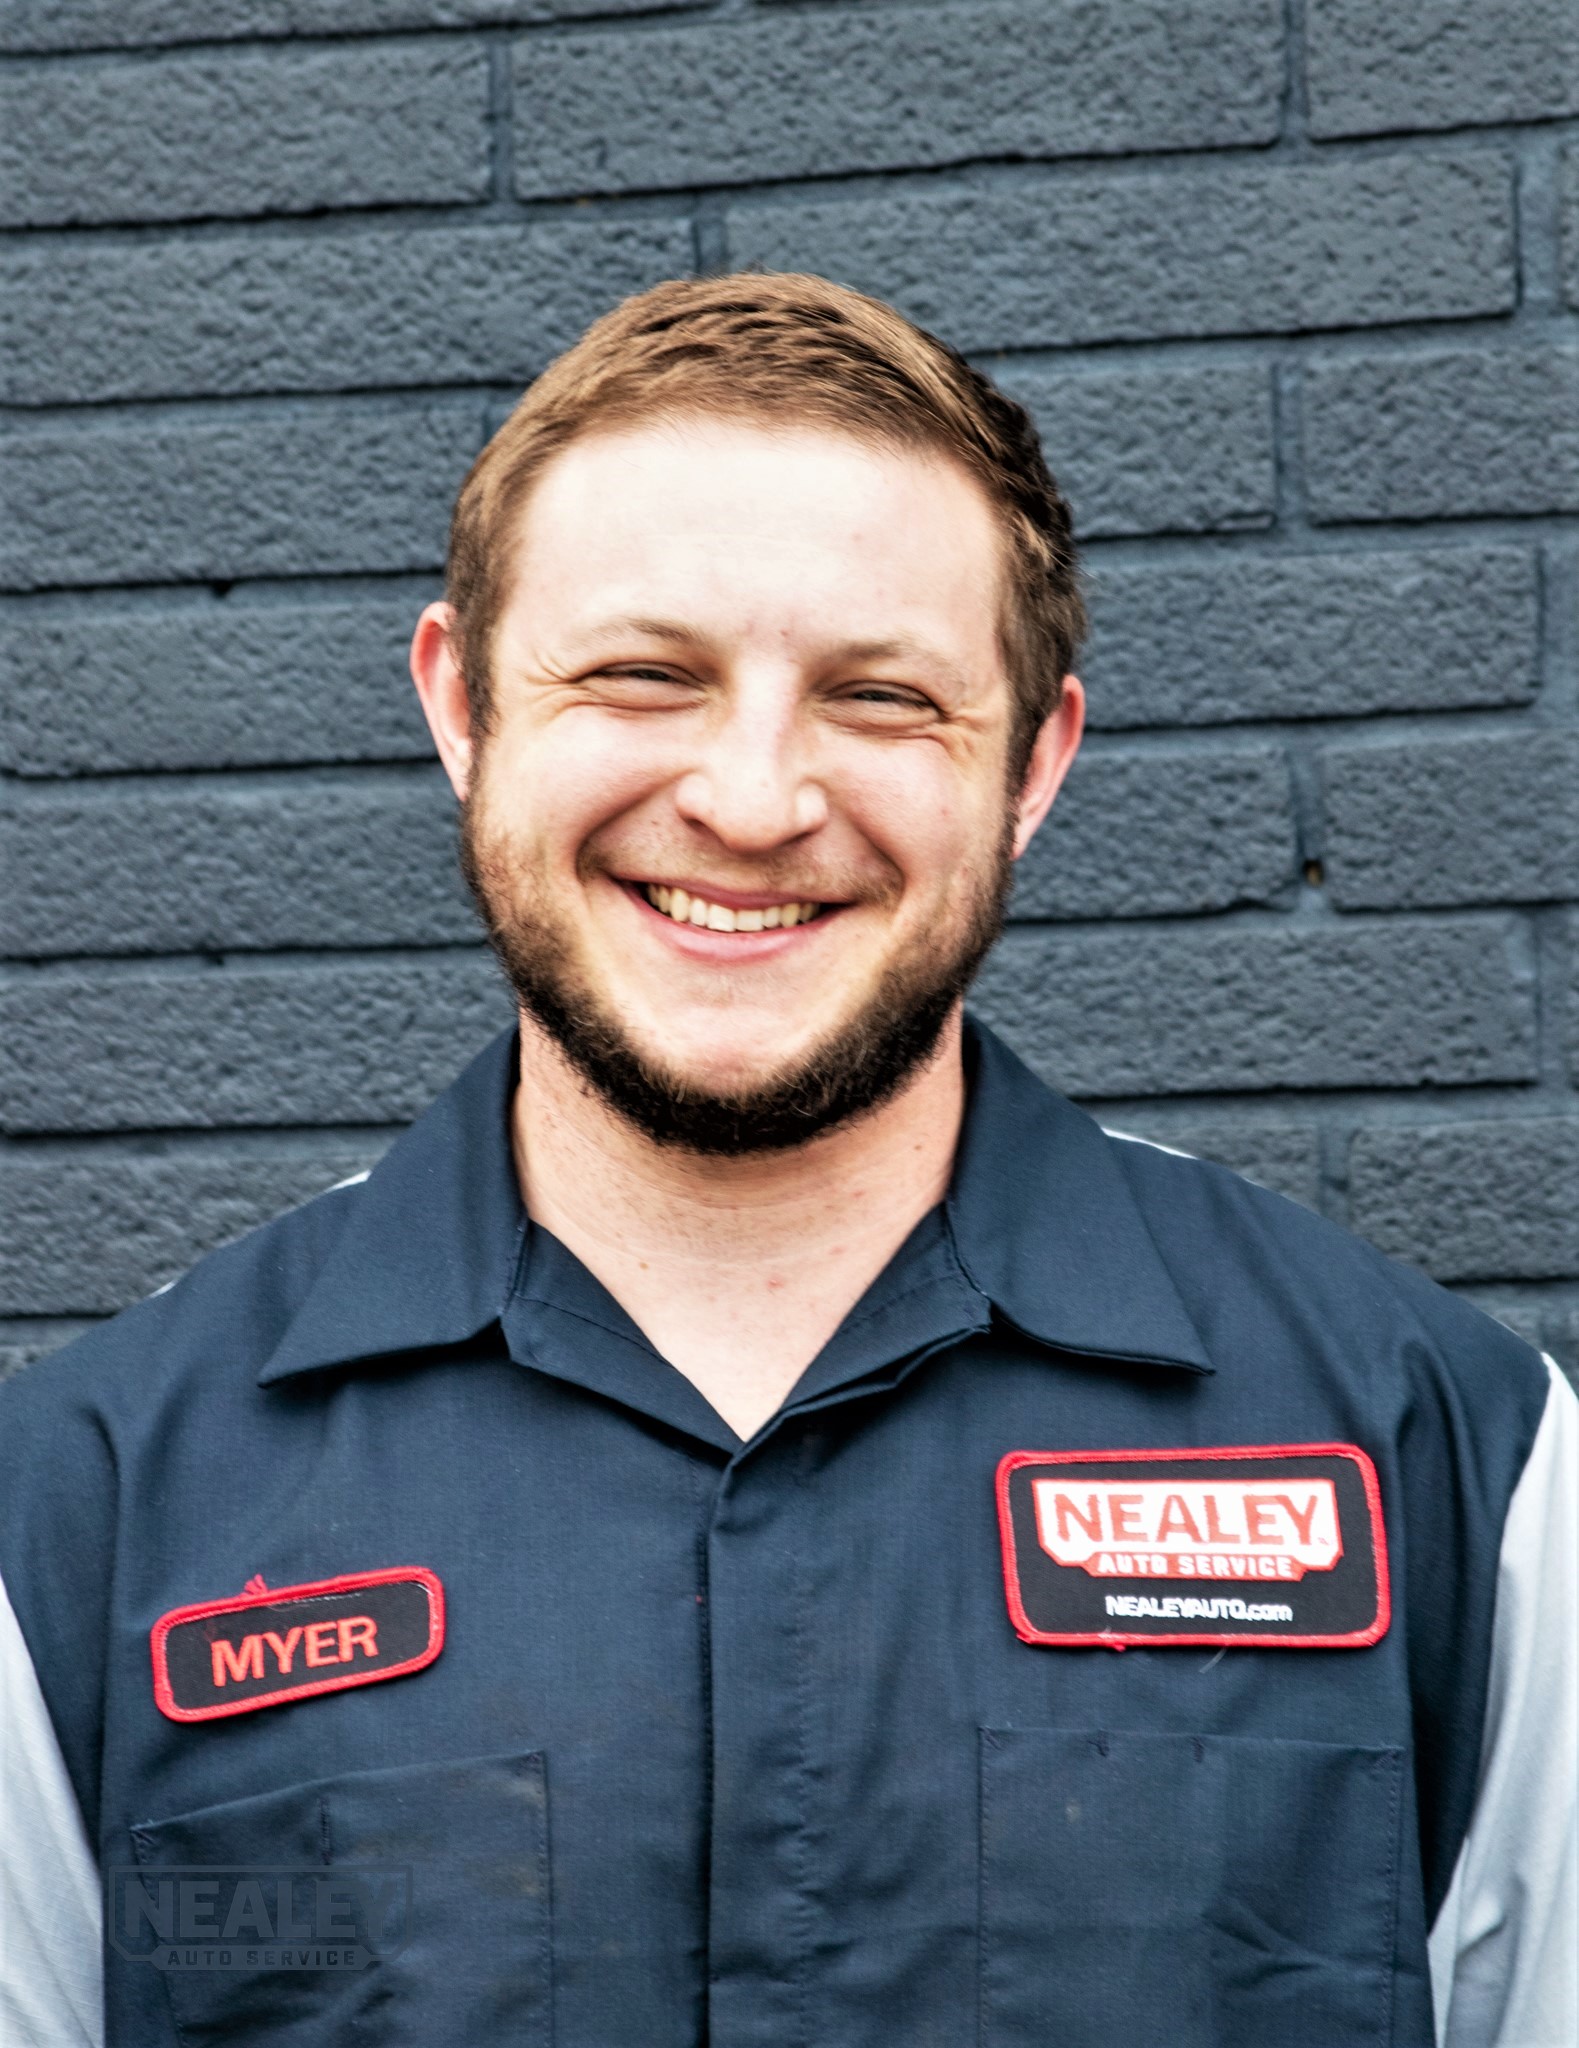 Mike Myer - Nealey Auto Service - Edgewater